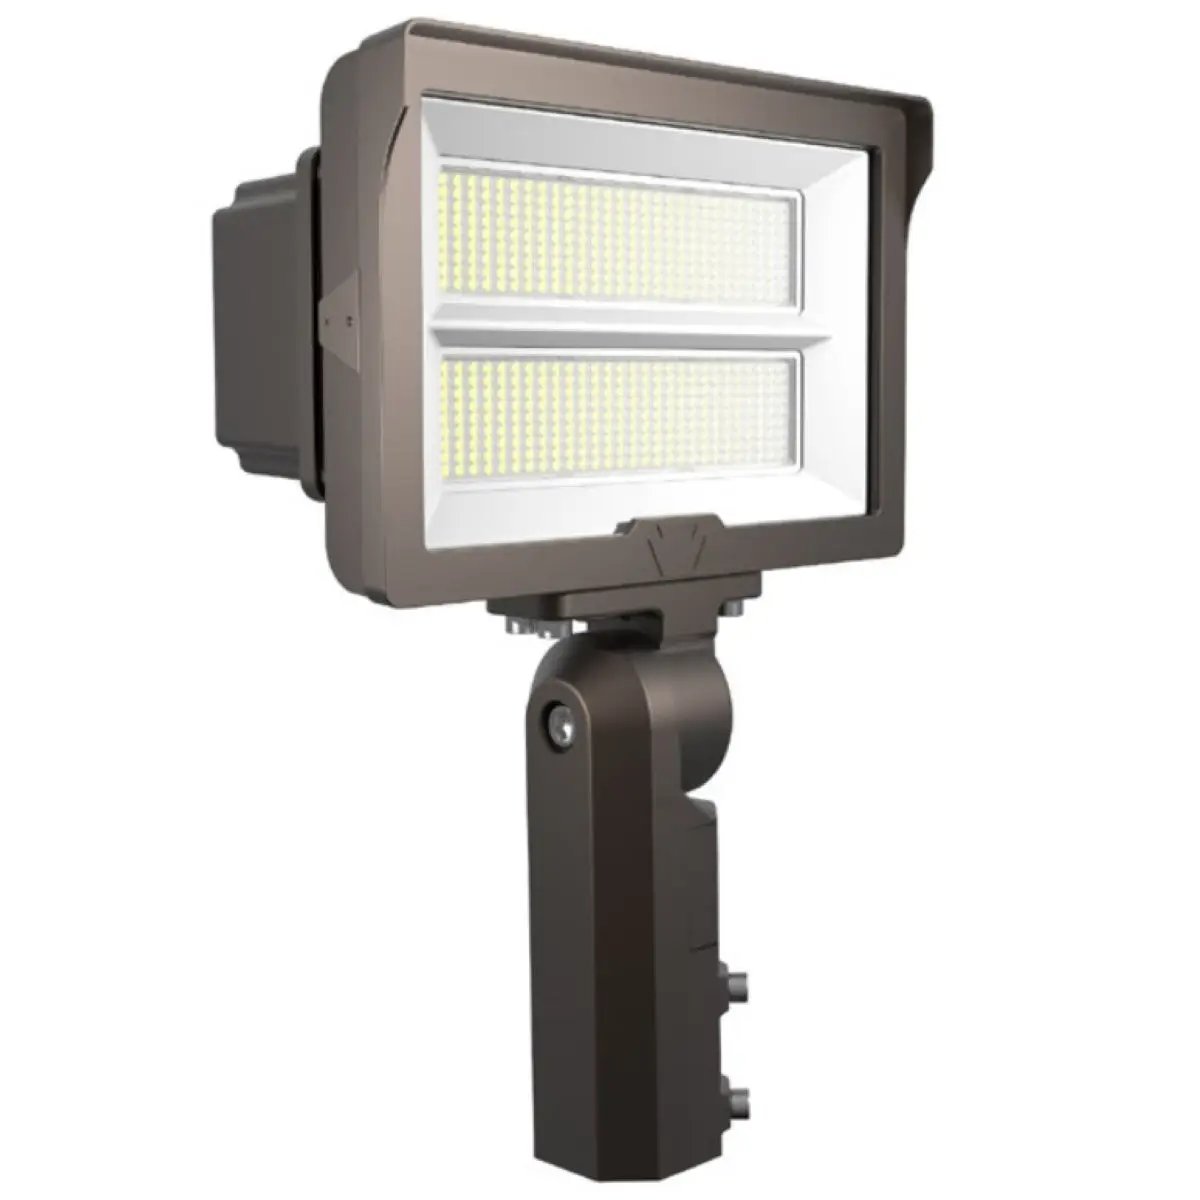 A close-up of a LED floodlight with adjustable color temperature and dual mounting options. Ideal for spacious areas like parking lots and building facades. 10500 to 19600 lumens of tunable white light. Slip fitter and trunnion mounts. Dimmable with built-in photocell. Keystone Technologies brand.